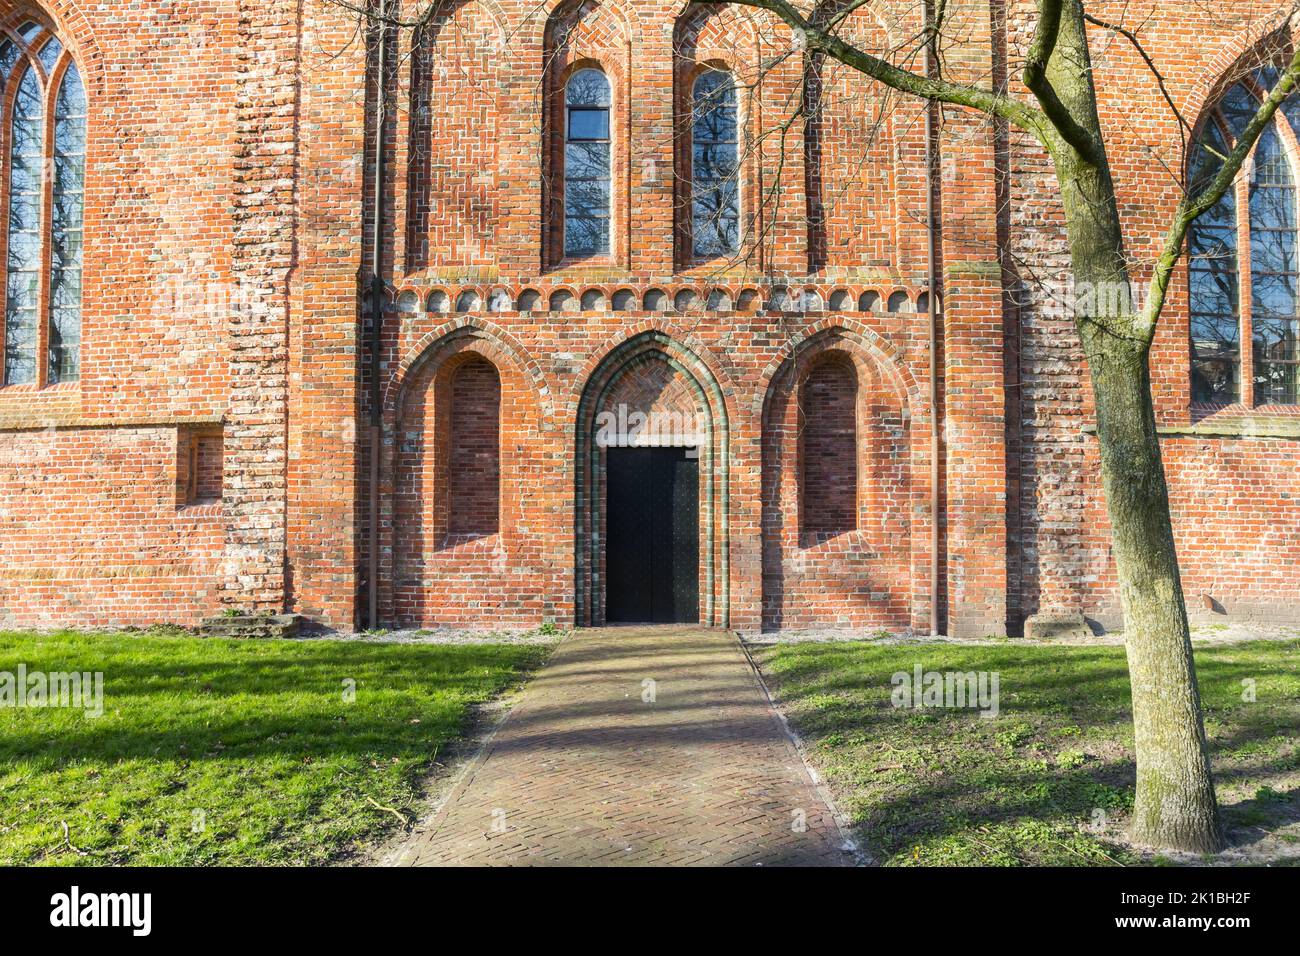 Entrance to the historic Nicolai church in Appingedam, Netherlands Stock Photo